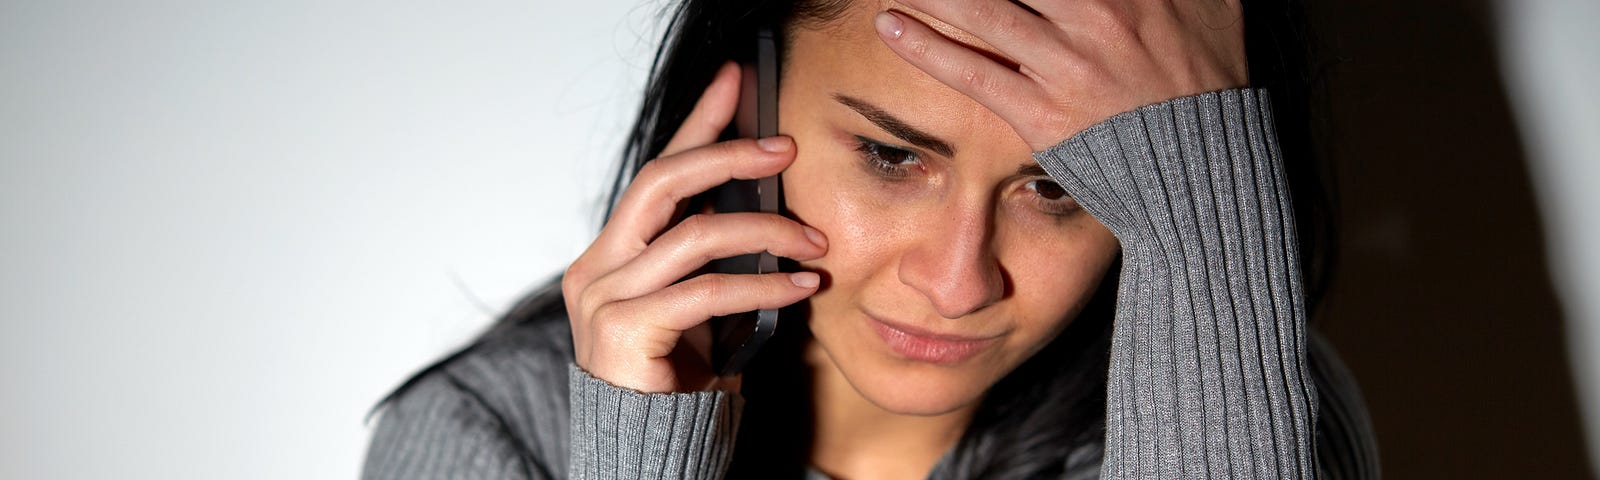 A woman wearing a gray sweater crying while on the phone (telephone psychic, self-disclosure, child abuse, rape)